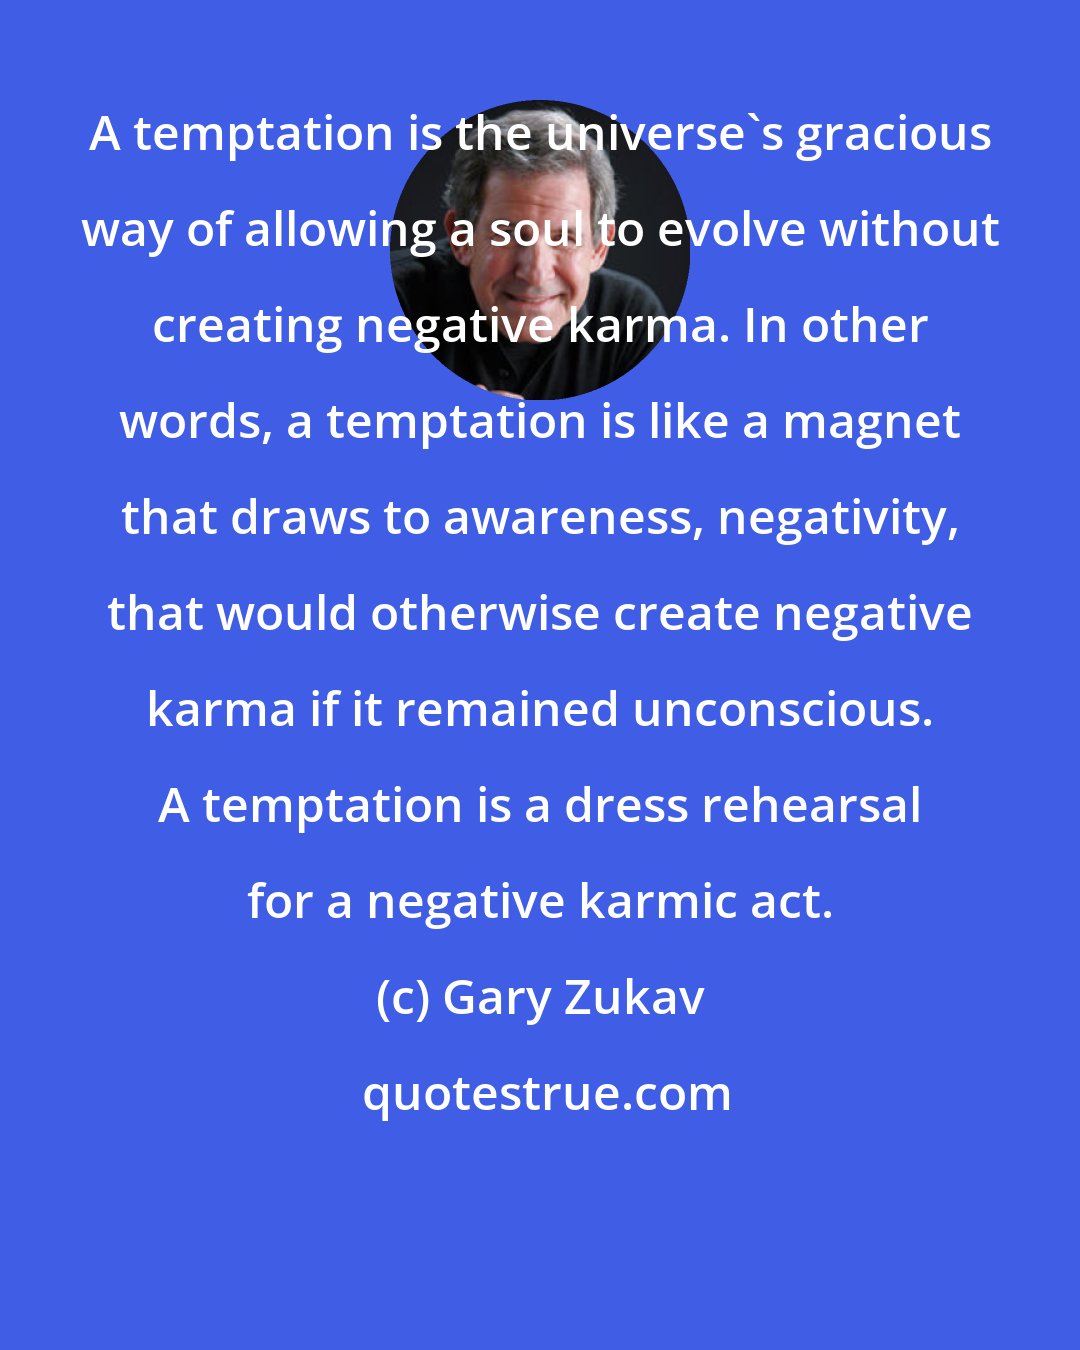 Gary Zukav: A temptation is the universe's gracious way of allowing a soul to evolve without creating negative karma. In other words, a temptation is like a magnet that draws to awareness, negativity, that would otherwise create negative karma if it remained unconscious. A temptation is a dress rehearsal for a negative karmic act.